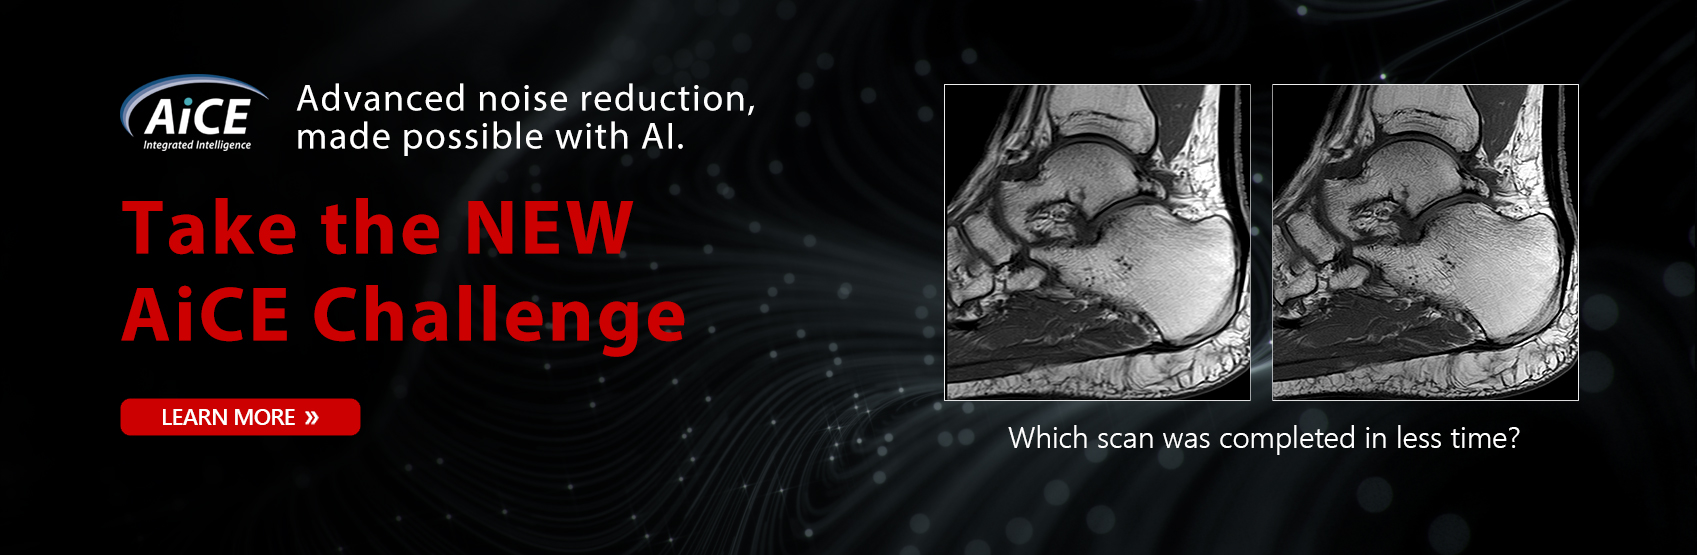 Advanced noise reduction, made possible with AI. Take the AiCE Challenge | Learn More